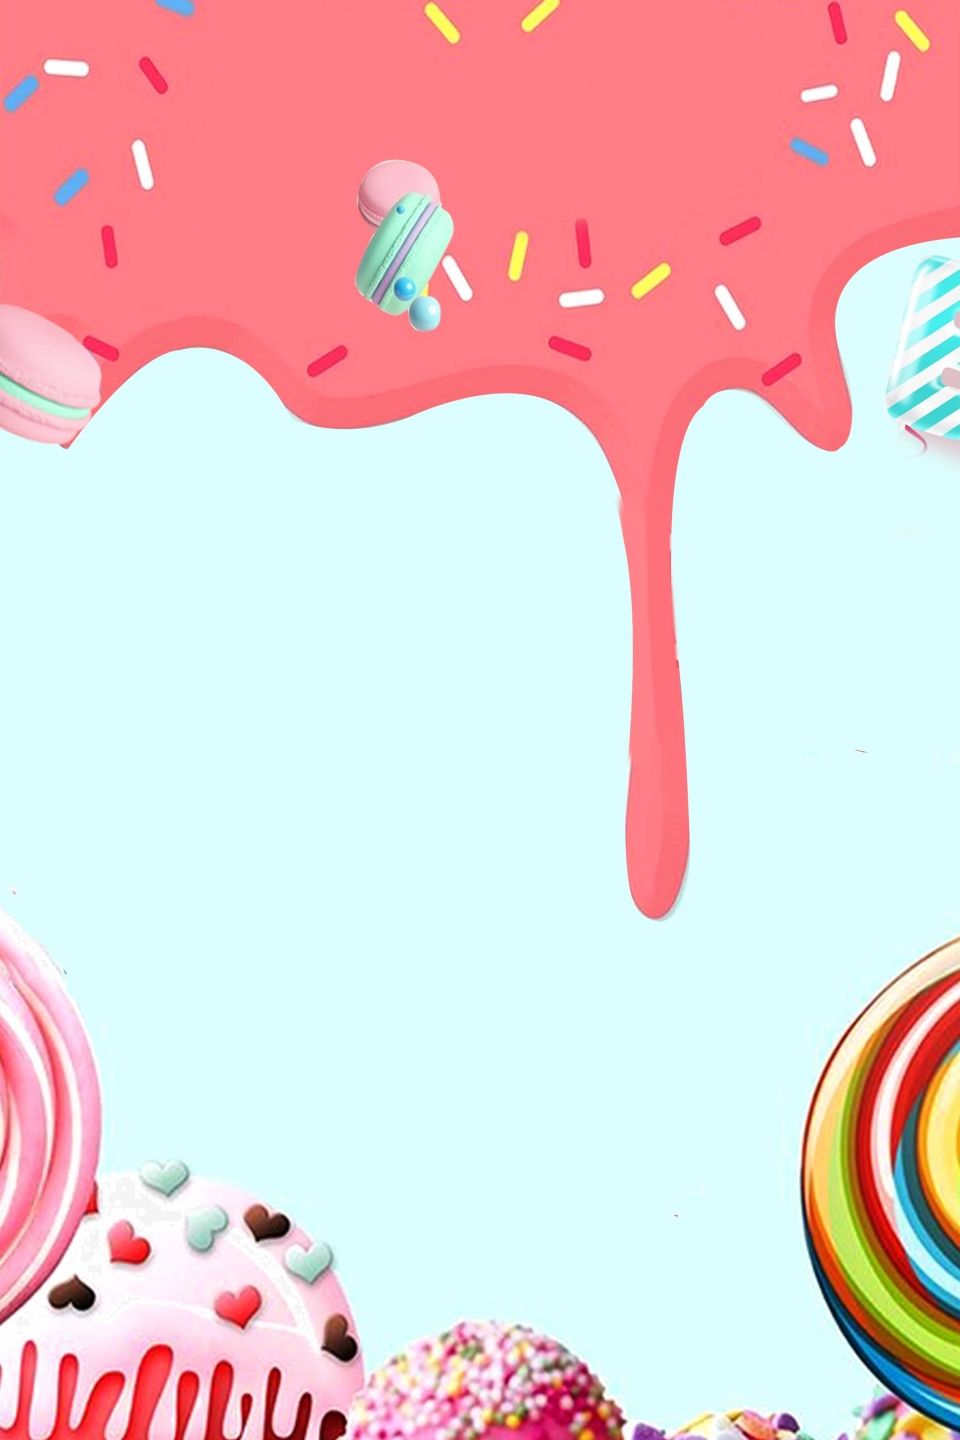 Vector Cartoon Illustration Birthday Cake Poster Background Material  Wallpaper Image For Free Download - Pngtree | Cartoon illustration, Food background  wallpapers, Cake background